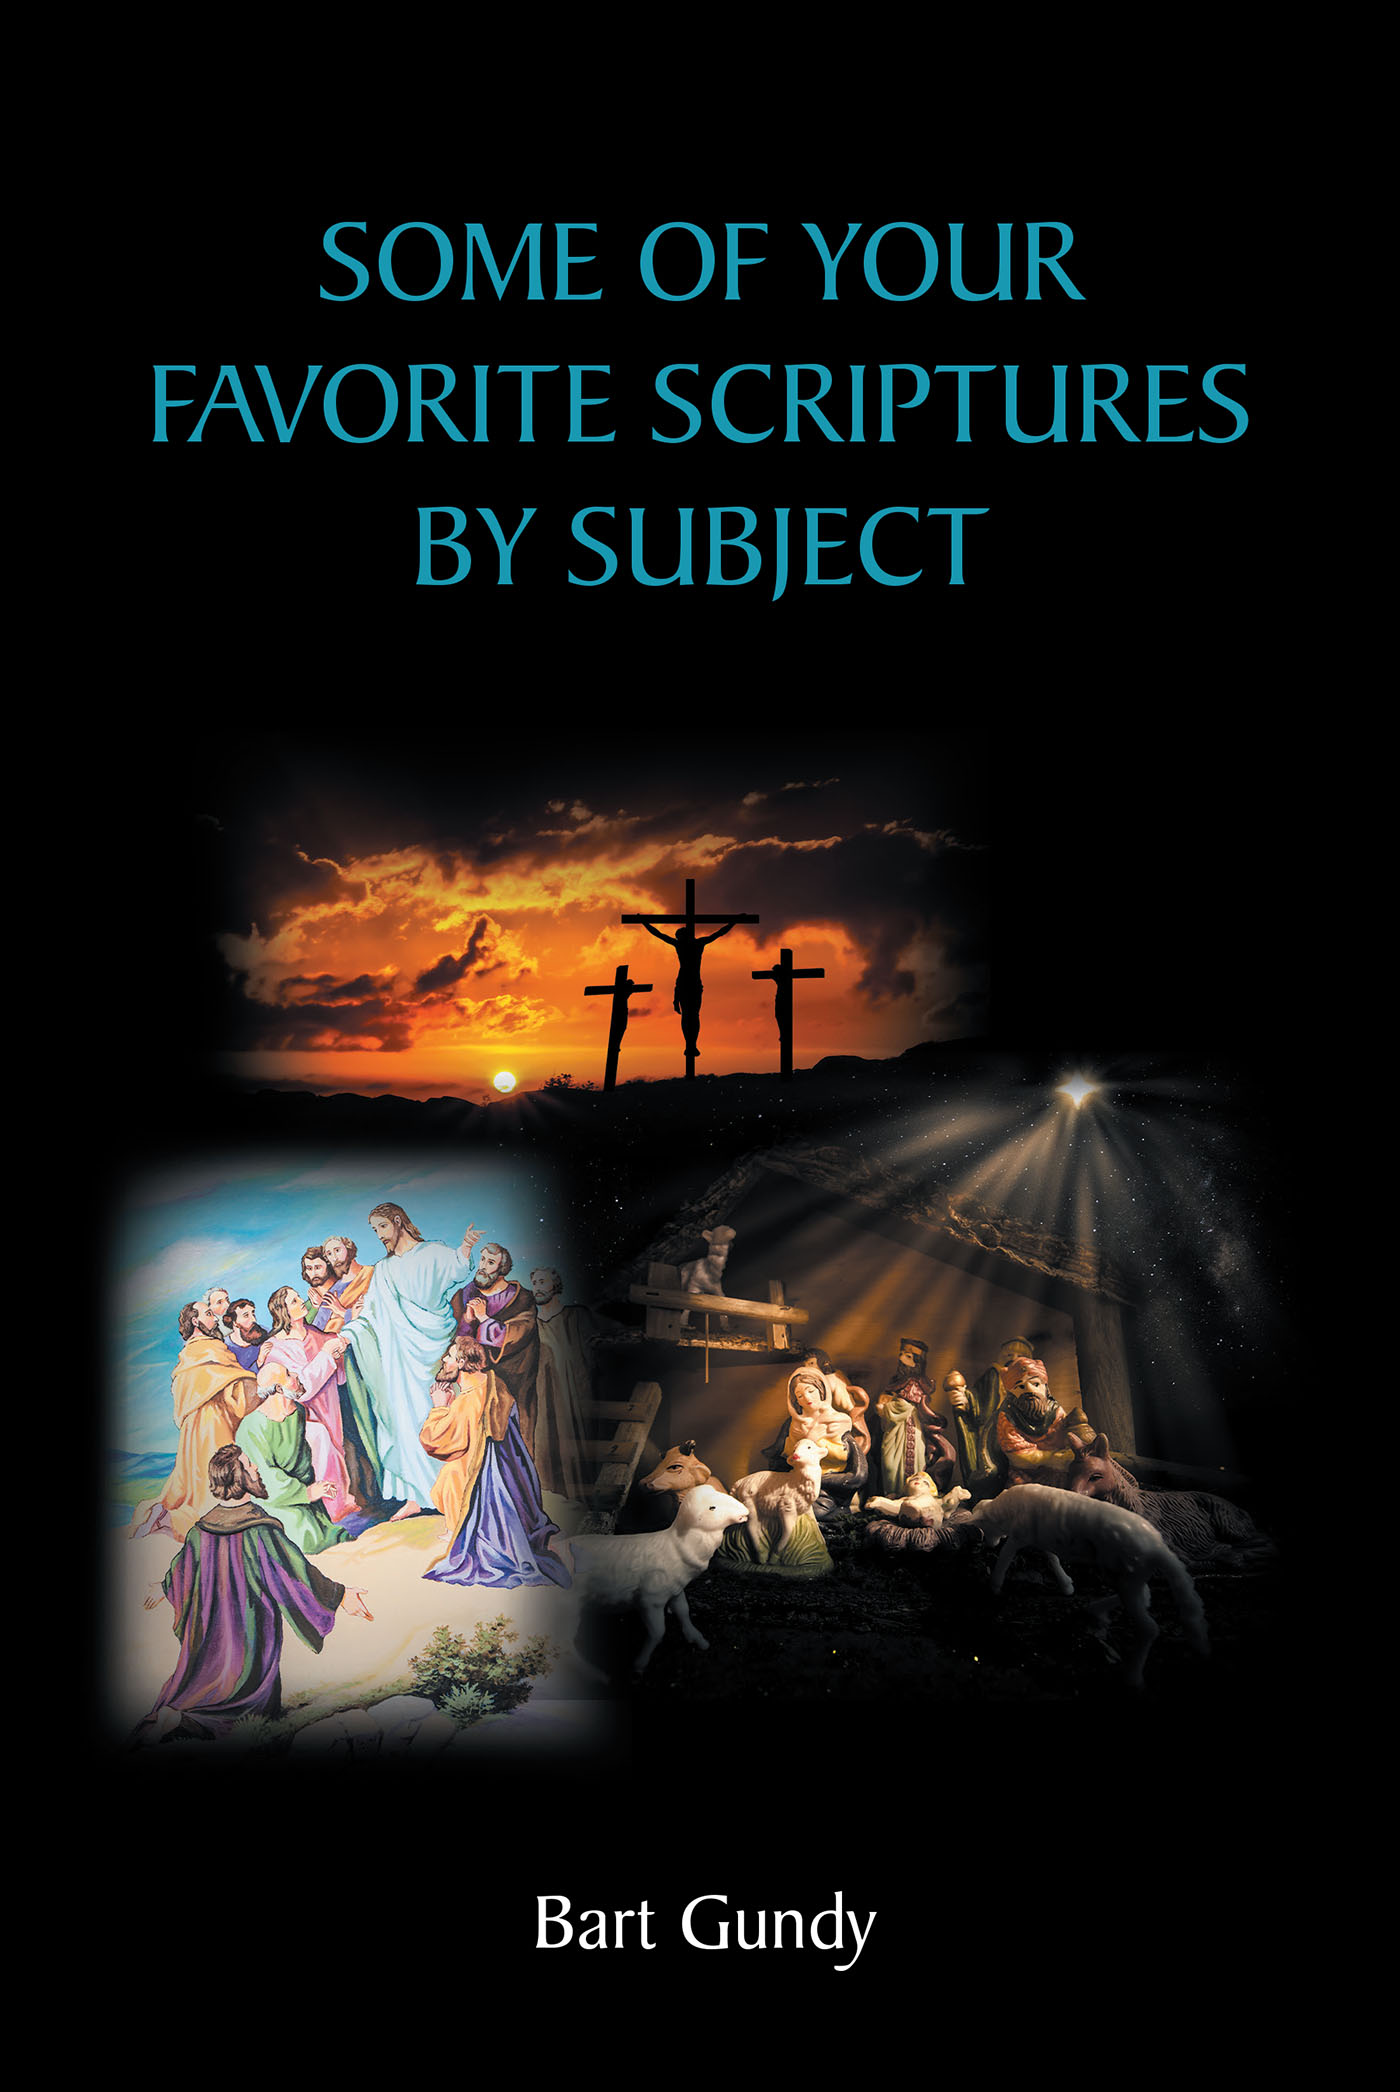 Bart Gundy’s Newly Released “Some of Your Favorite Scriptures by Subject” is a Helpful Resource for Readers Seeking a Deeper Understanding of the Bible